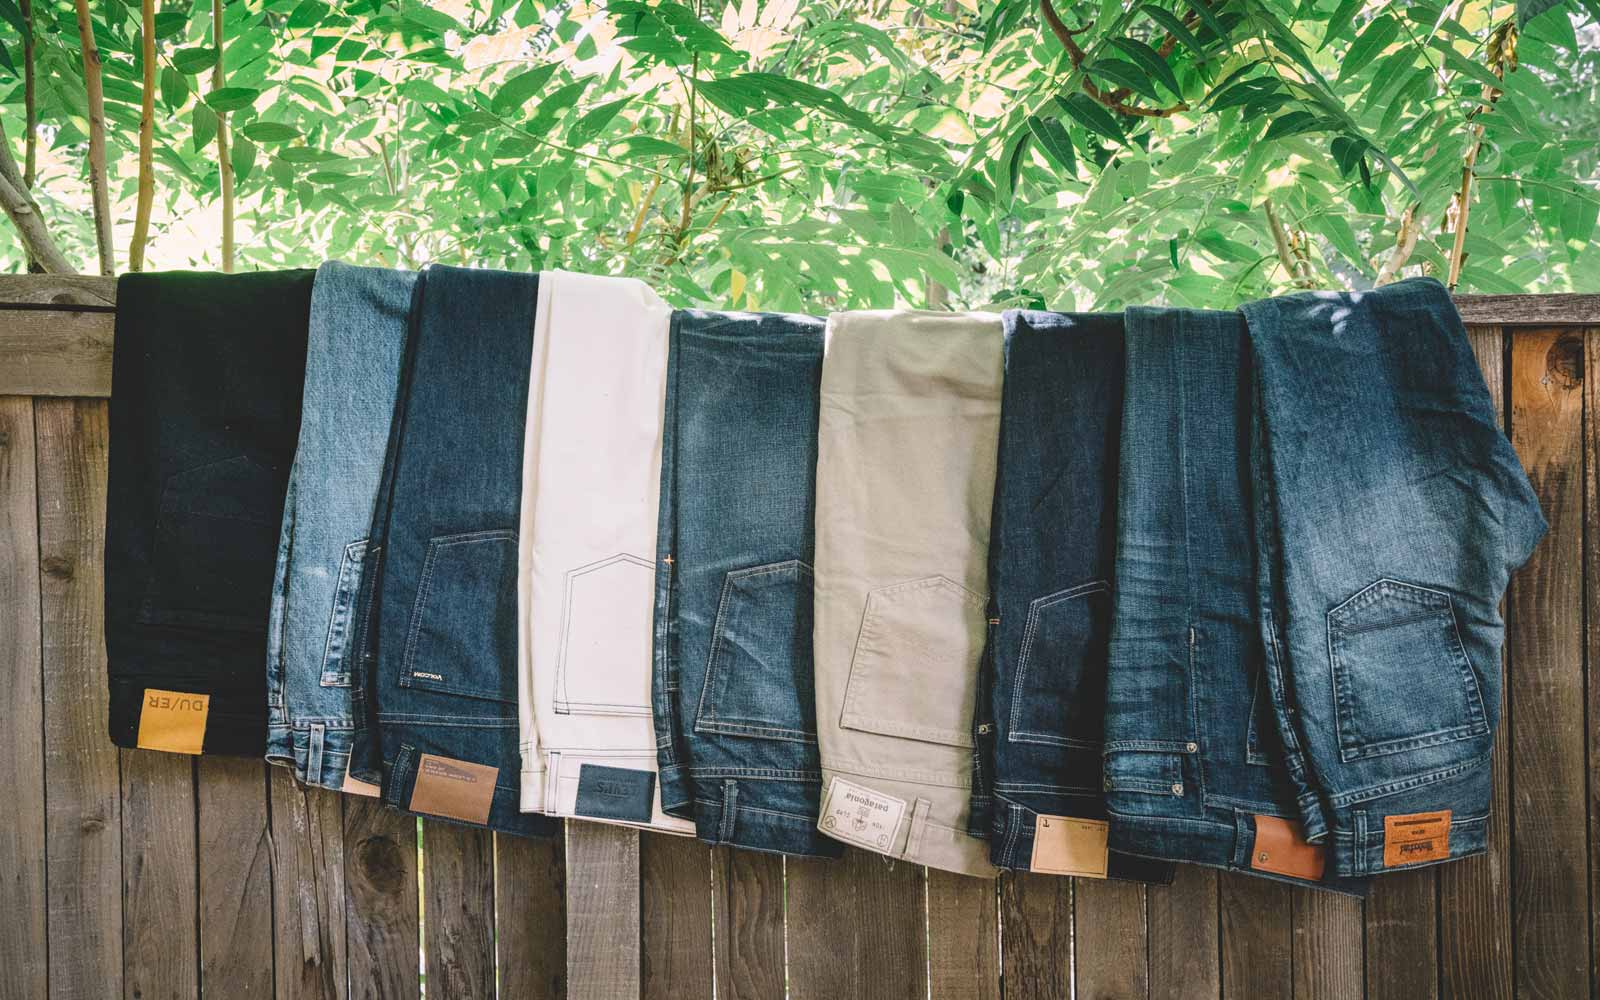 Various mens jeans draped over wooden fence